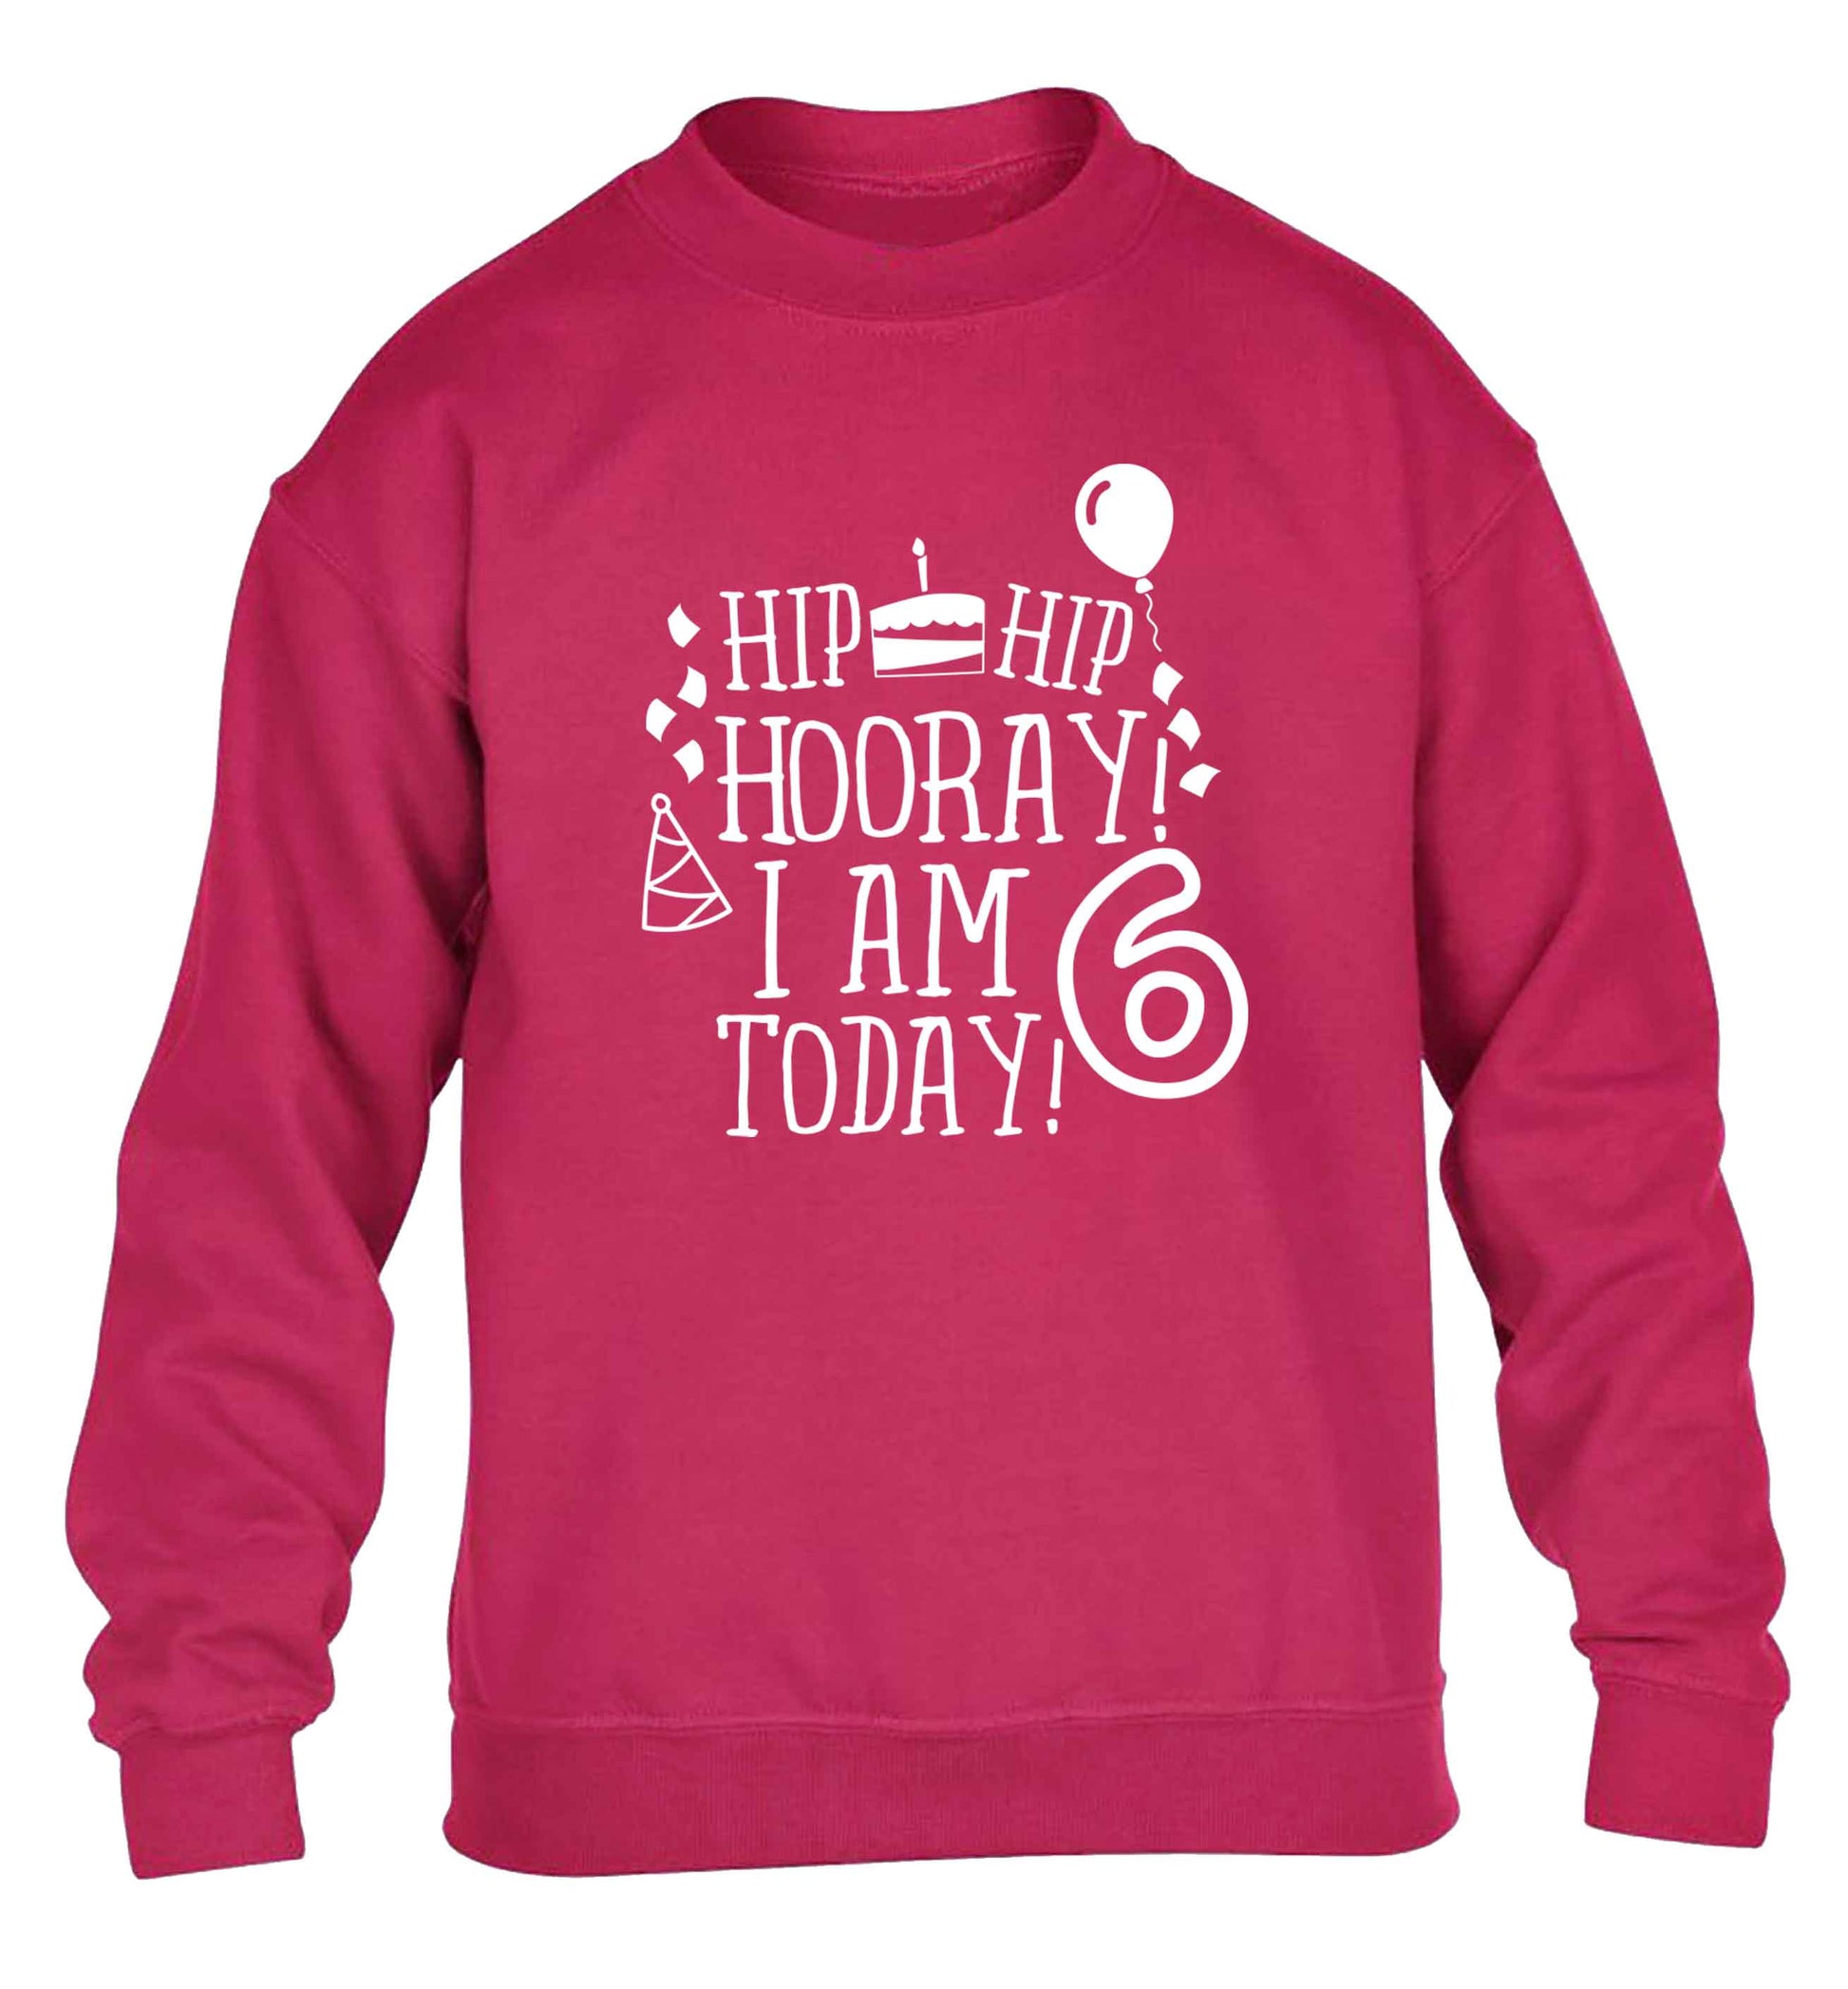 Hip hip hooray I am six today! children's pink sweater 12-13 Years